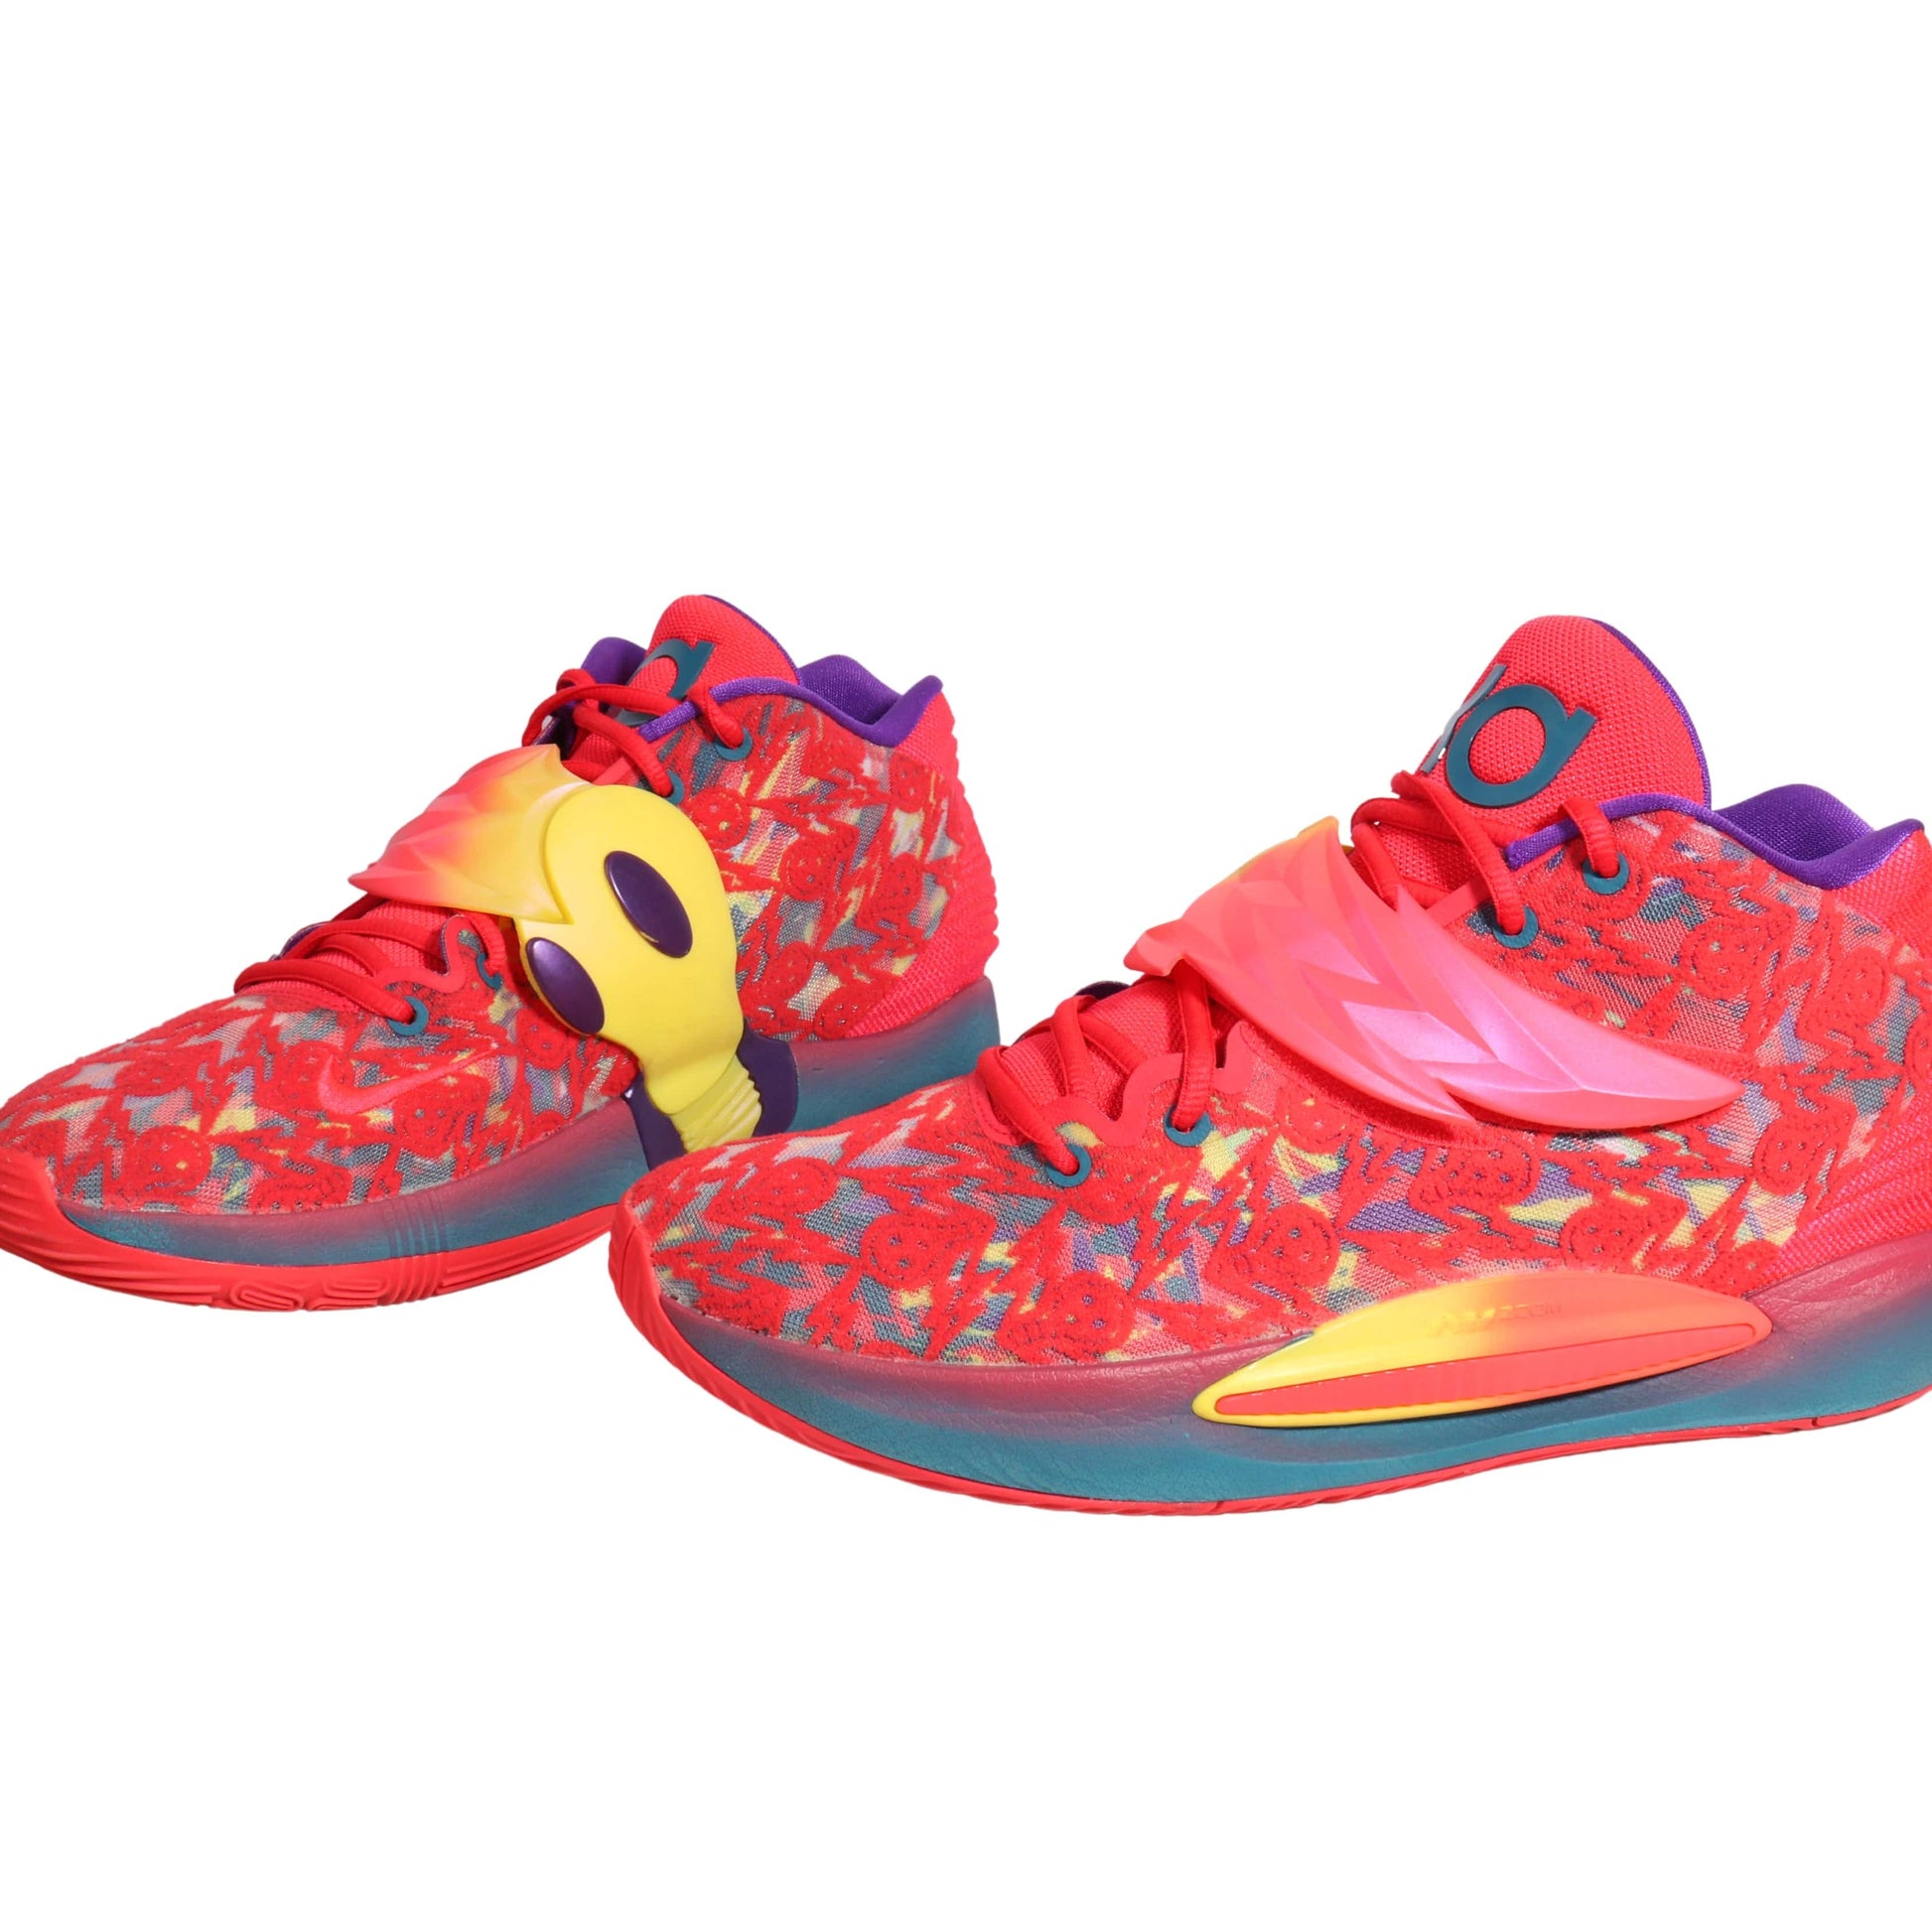 NIKE Athletic Shoes 46 / Multi-Color NIKE - Kevin Durant Light Cult Crypto Club Shoes